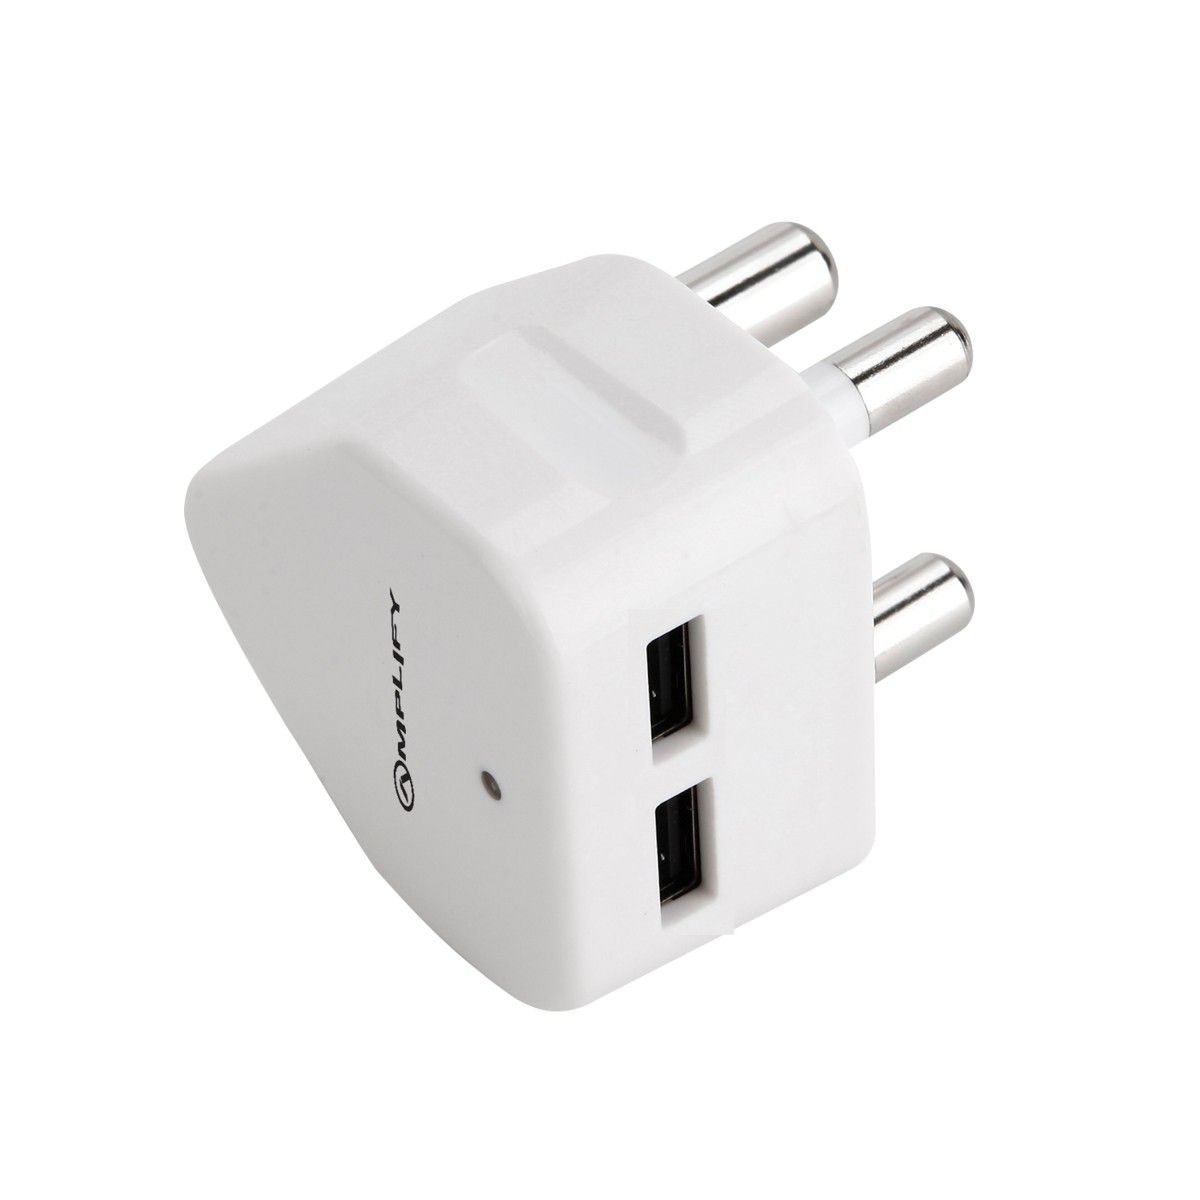 Amplify Empower Series Double USB Wall Charger